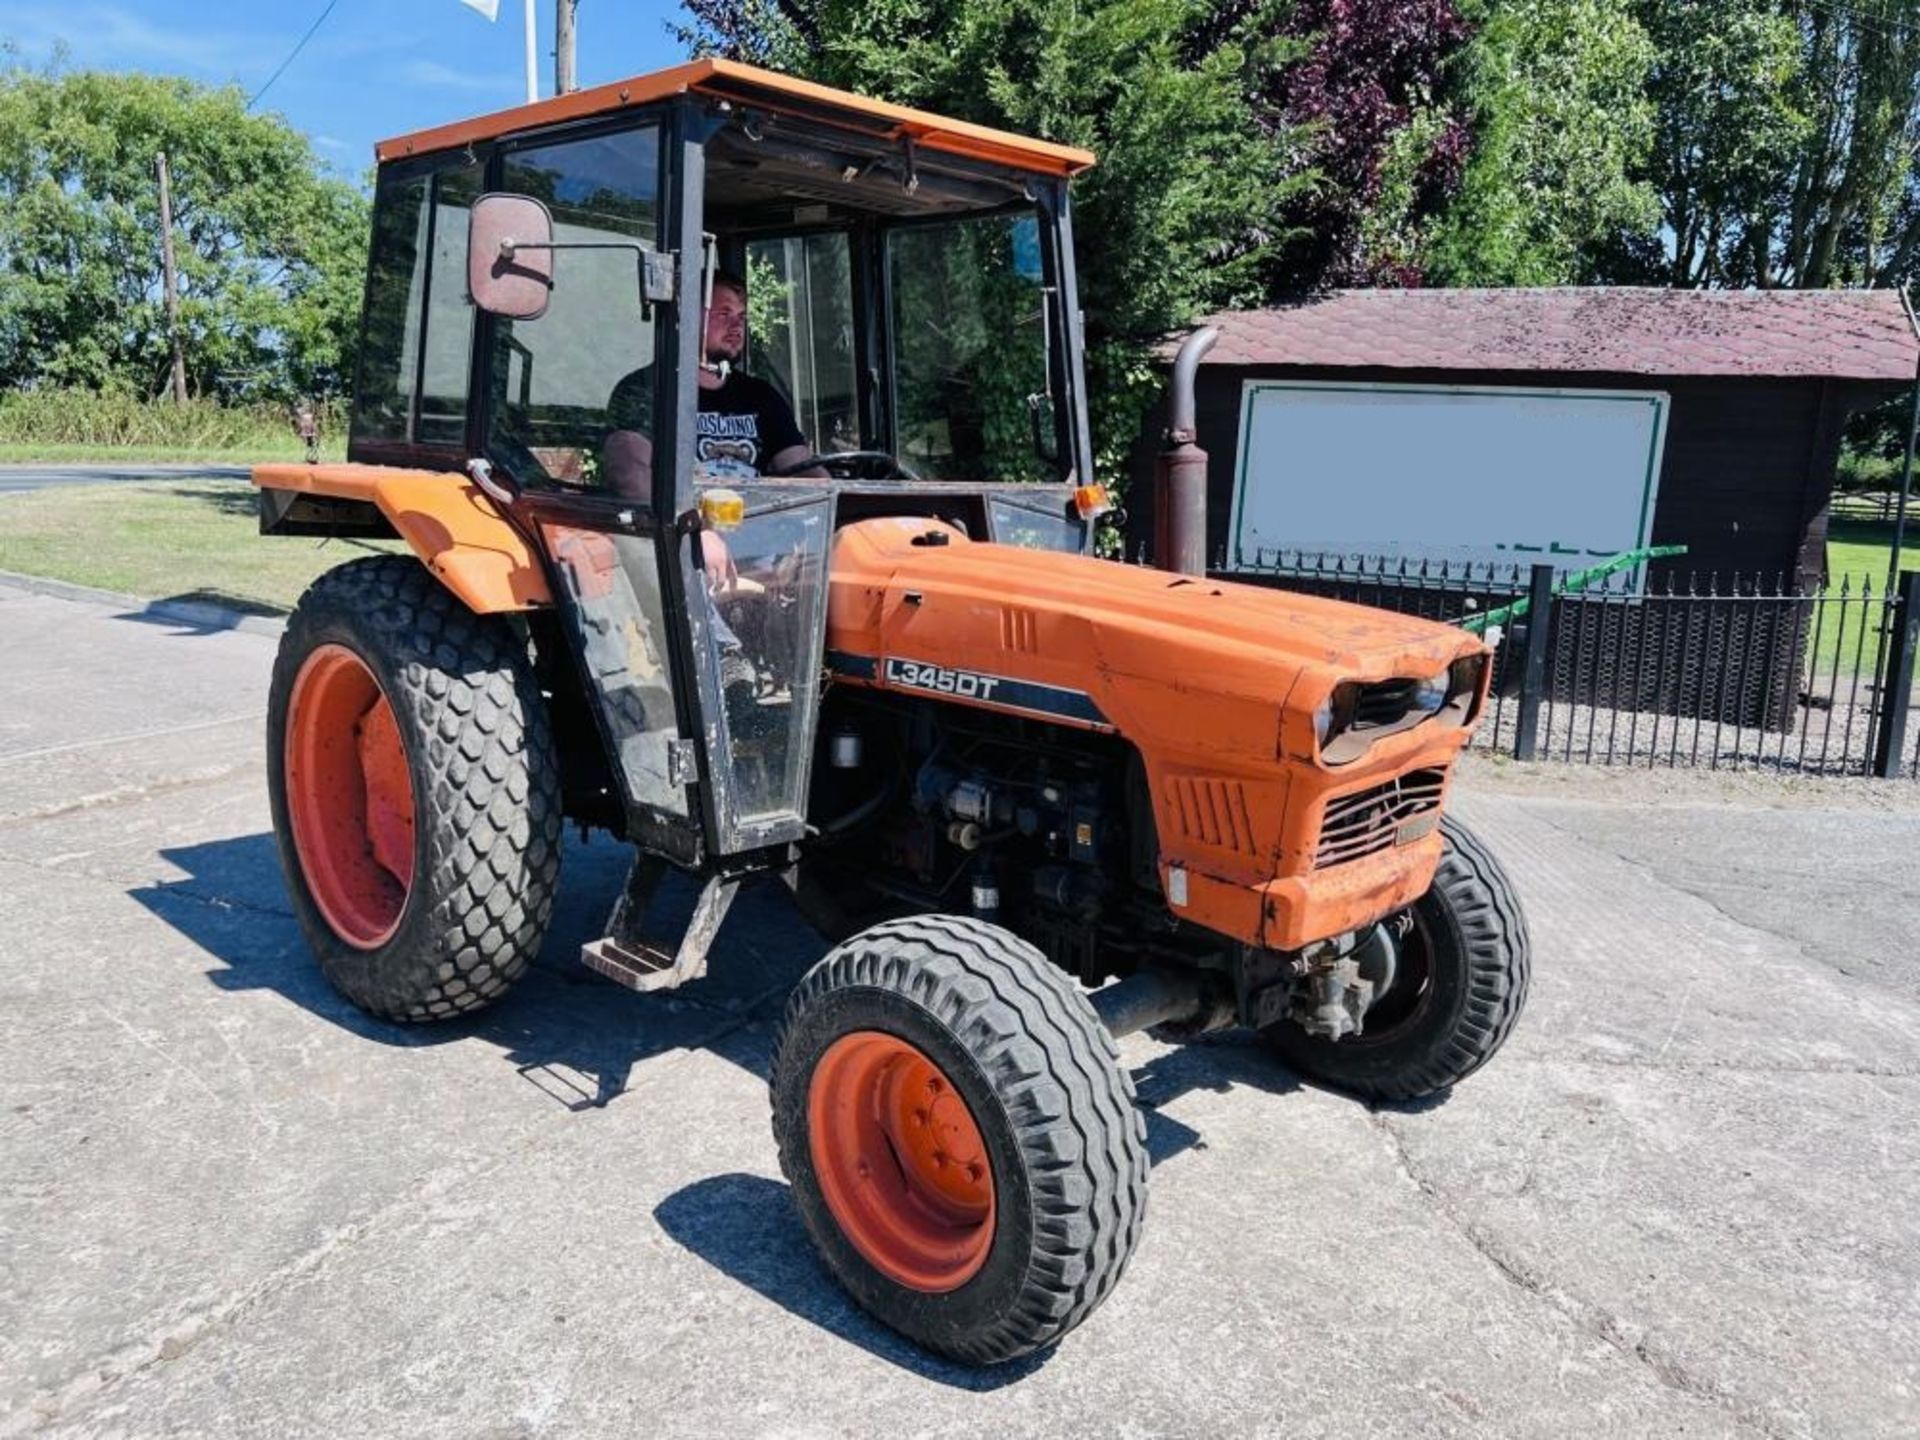 KUBOTA L345DT 4WD TRACTOR - READING 2986 HOURS